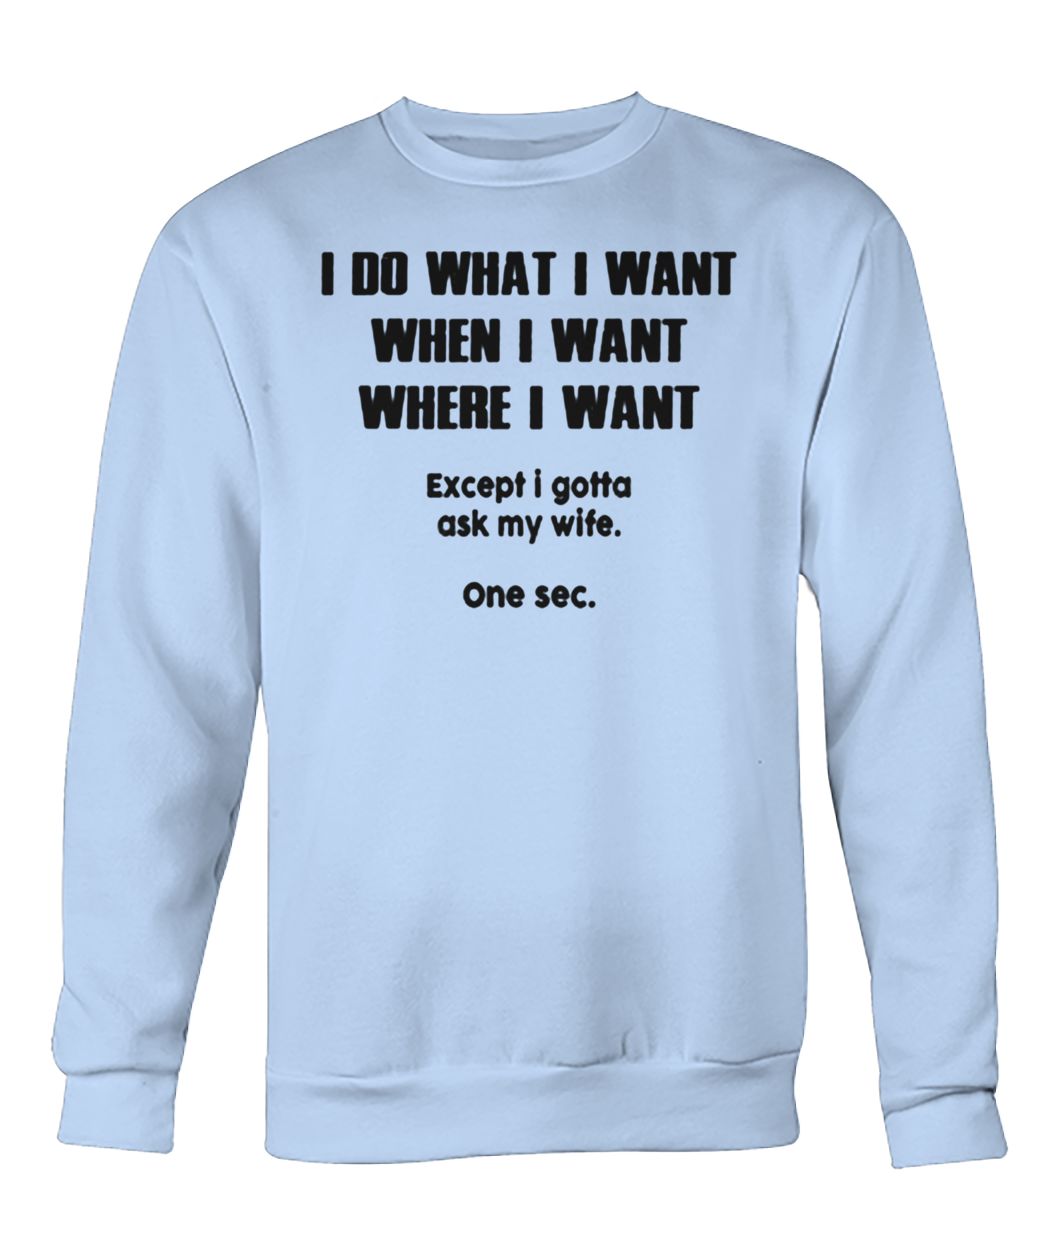 I do what when where I want except I gotta ask my wife crew neck sweatshirt